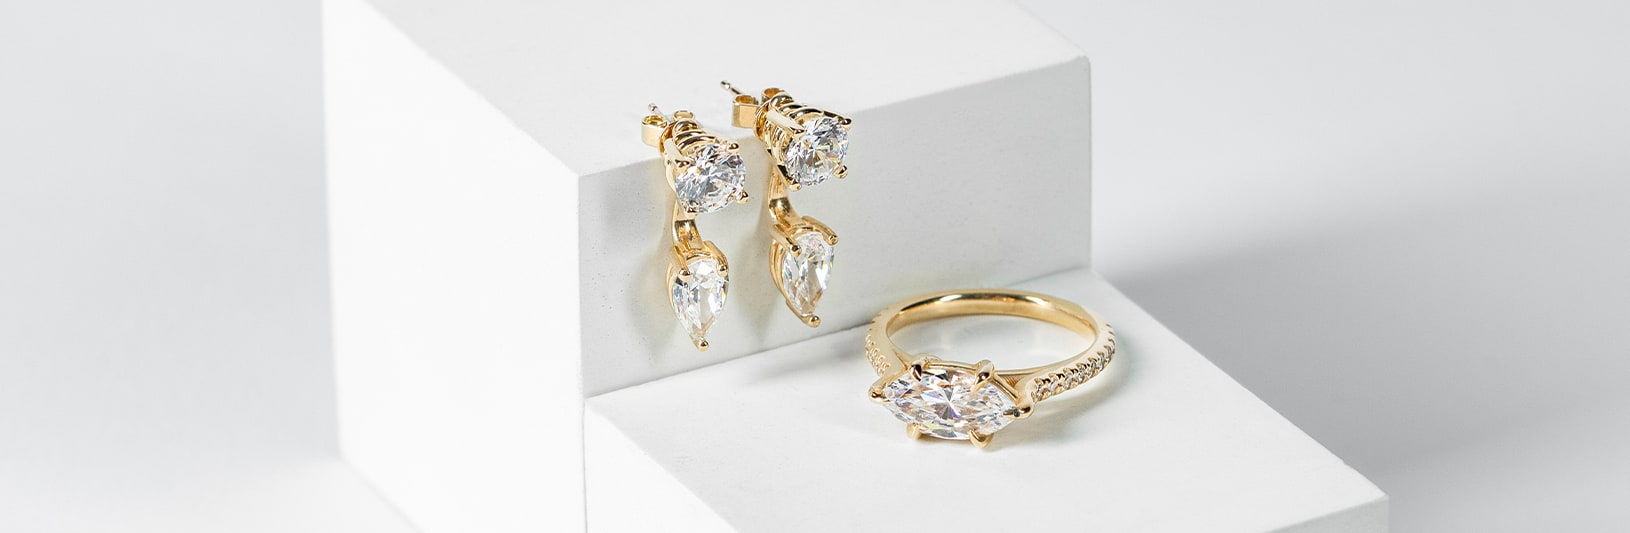 Yellow gold drop earrings and a yellow gold ring with a marquise stone